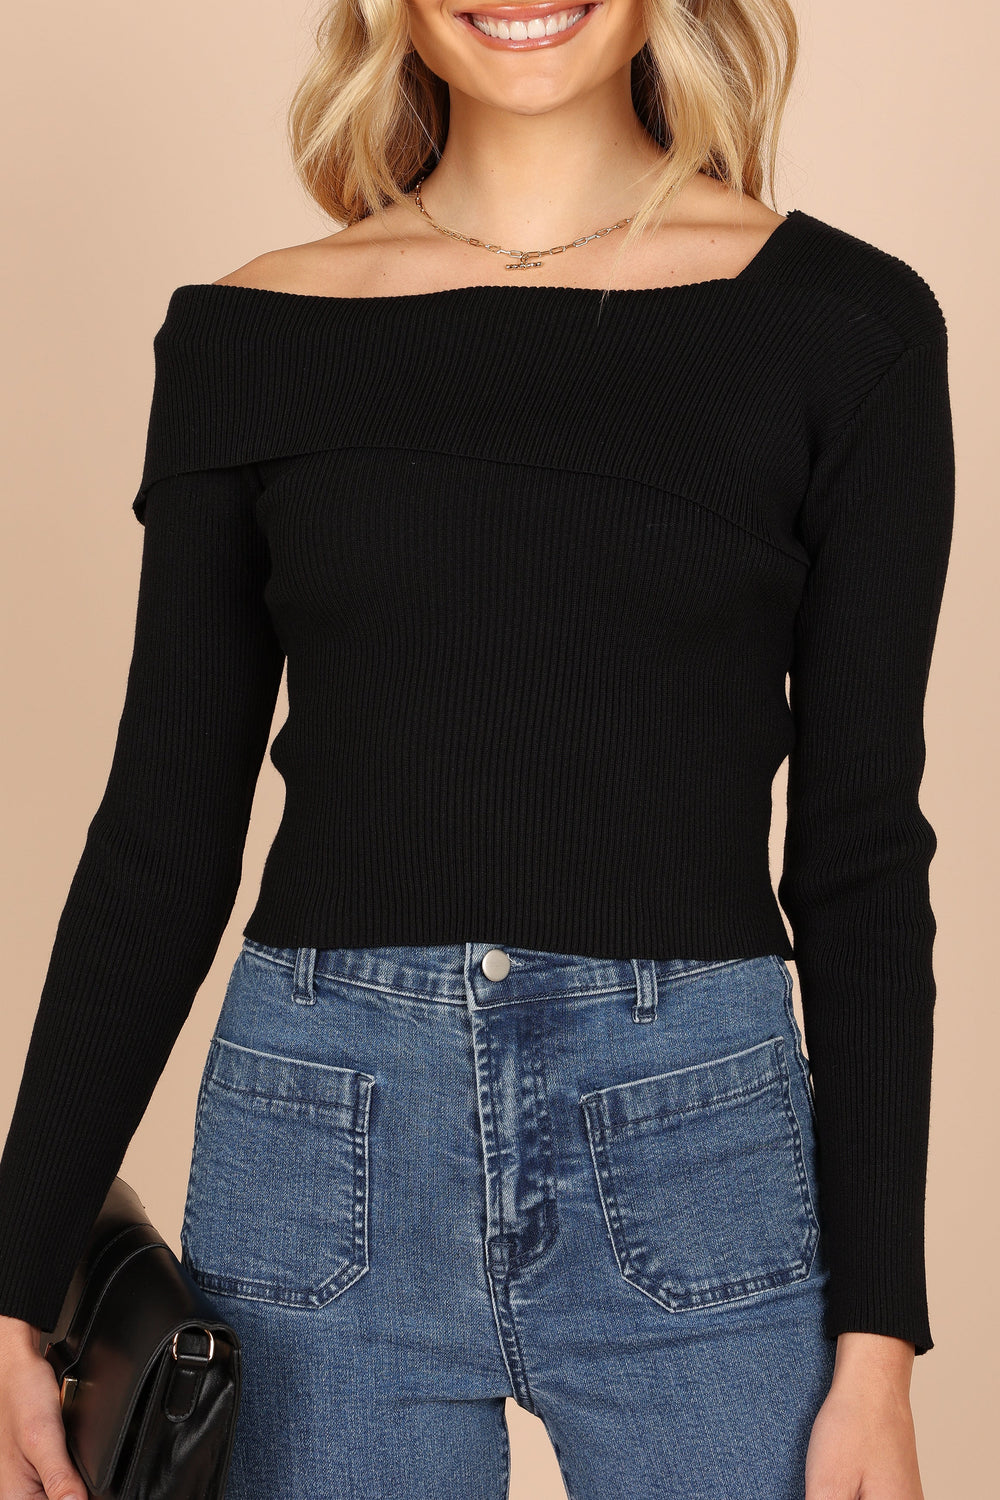 Petal and Pup USA KNITWEAR Alicia One Shoulder Knit Sweater - Black